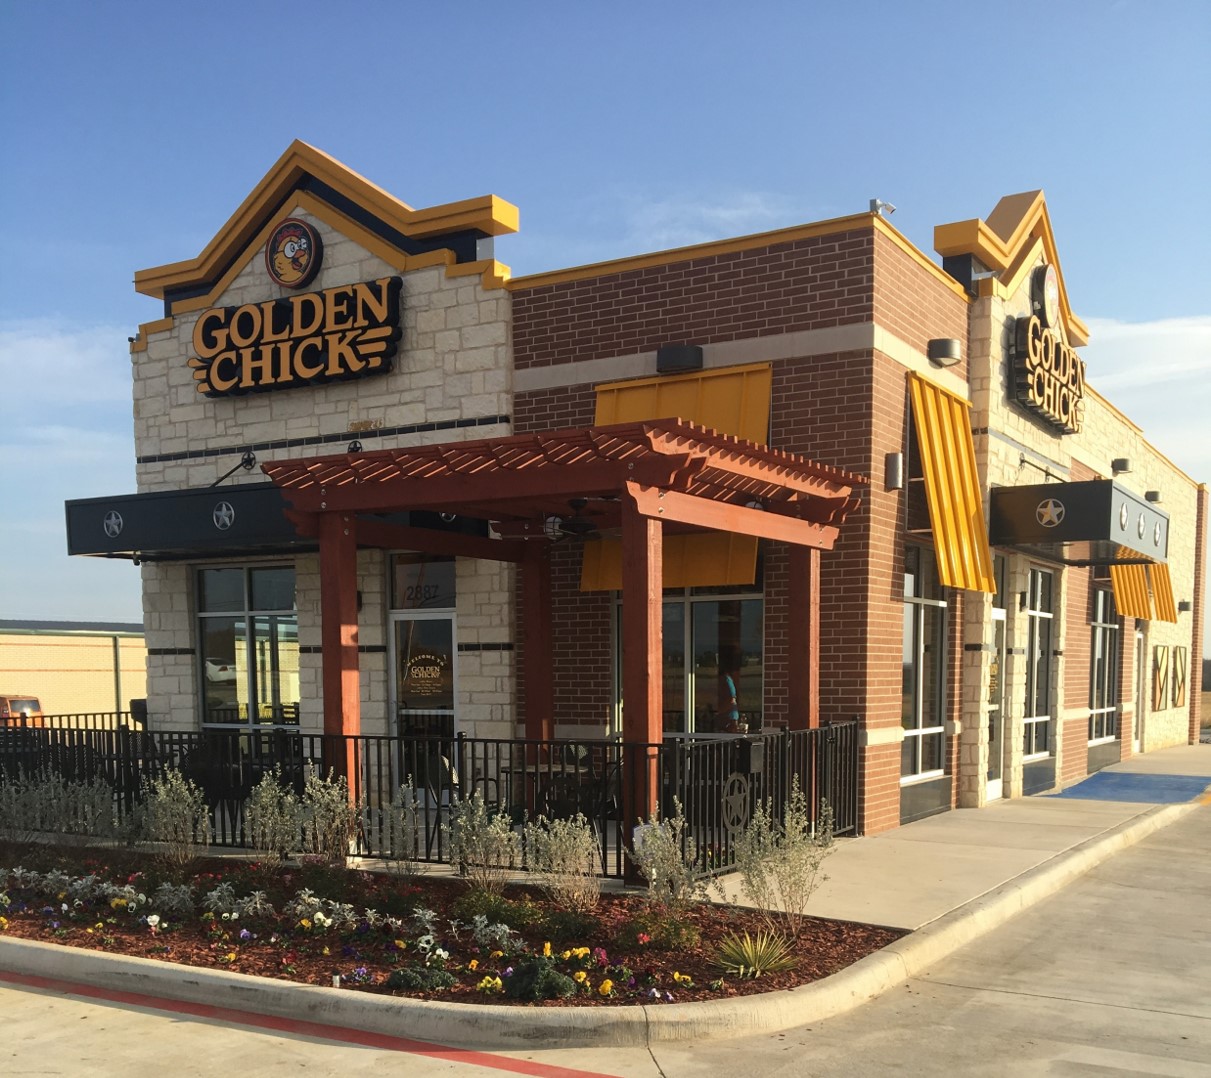 Golden Chick storefront.  Your local Golden Chick fast food restaurant in Ovilla, Texas